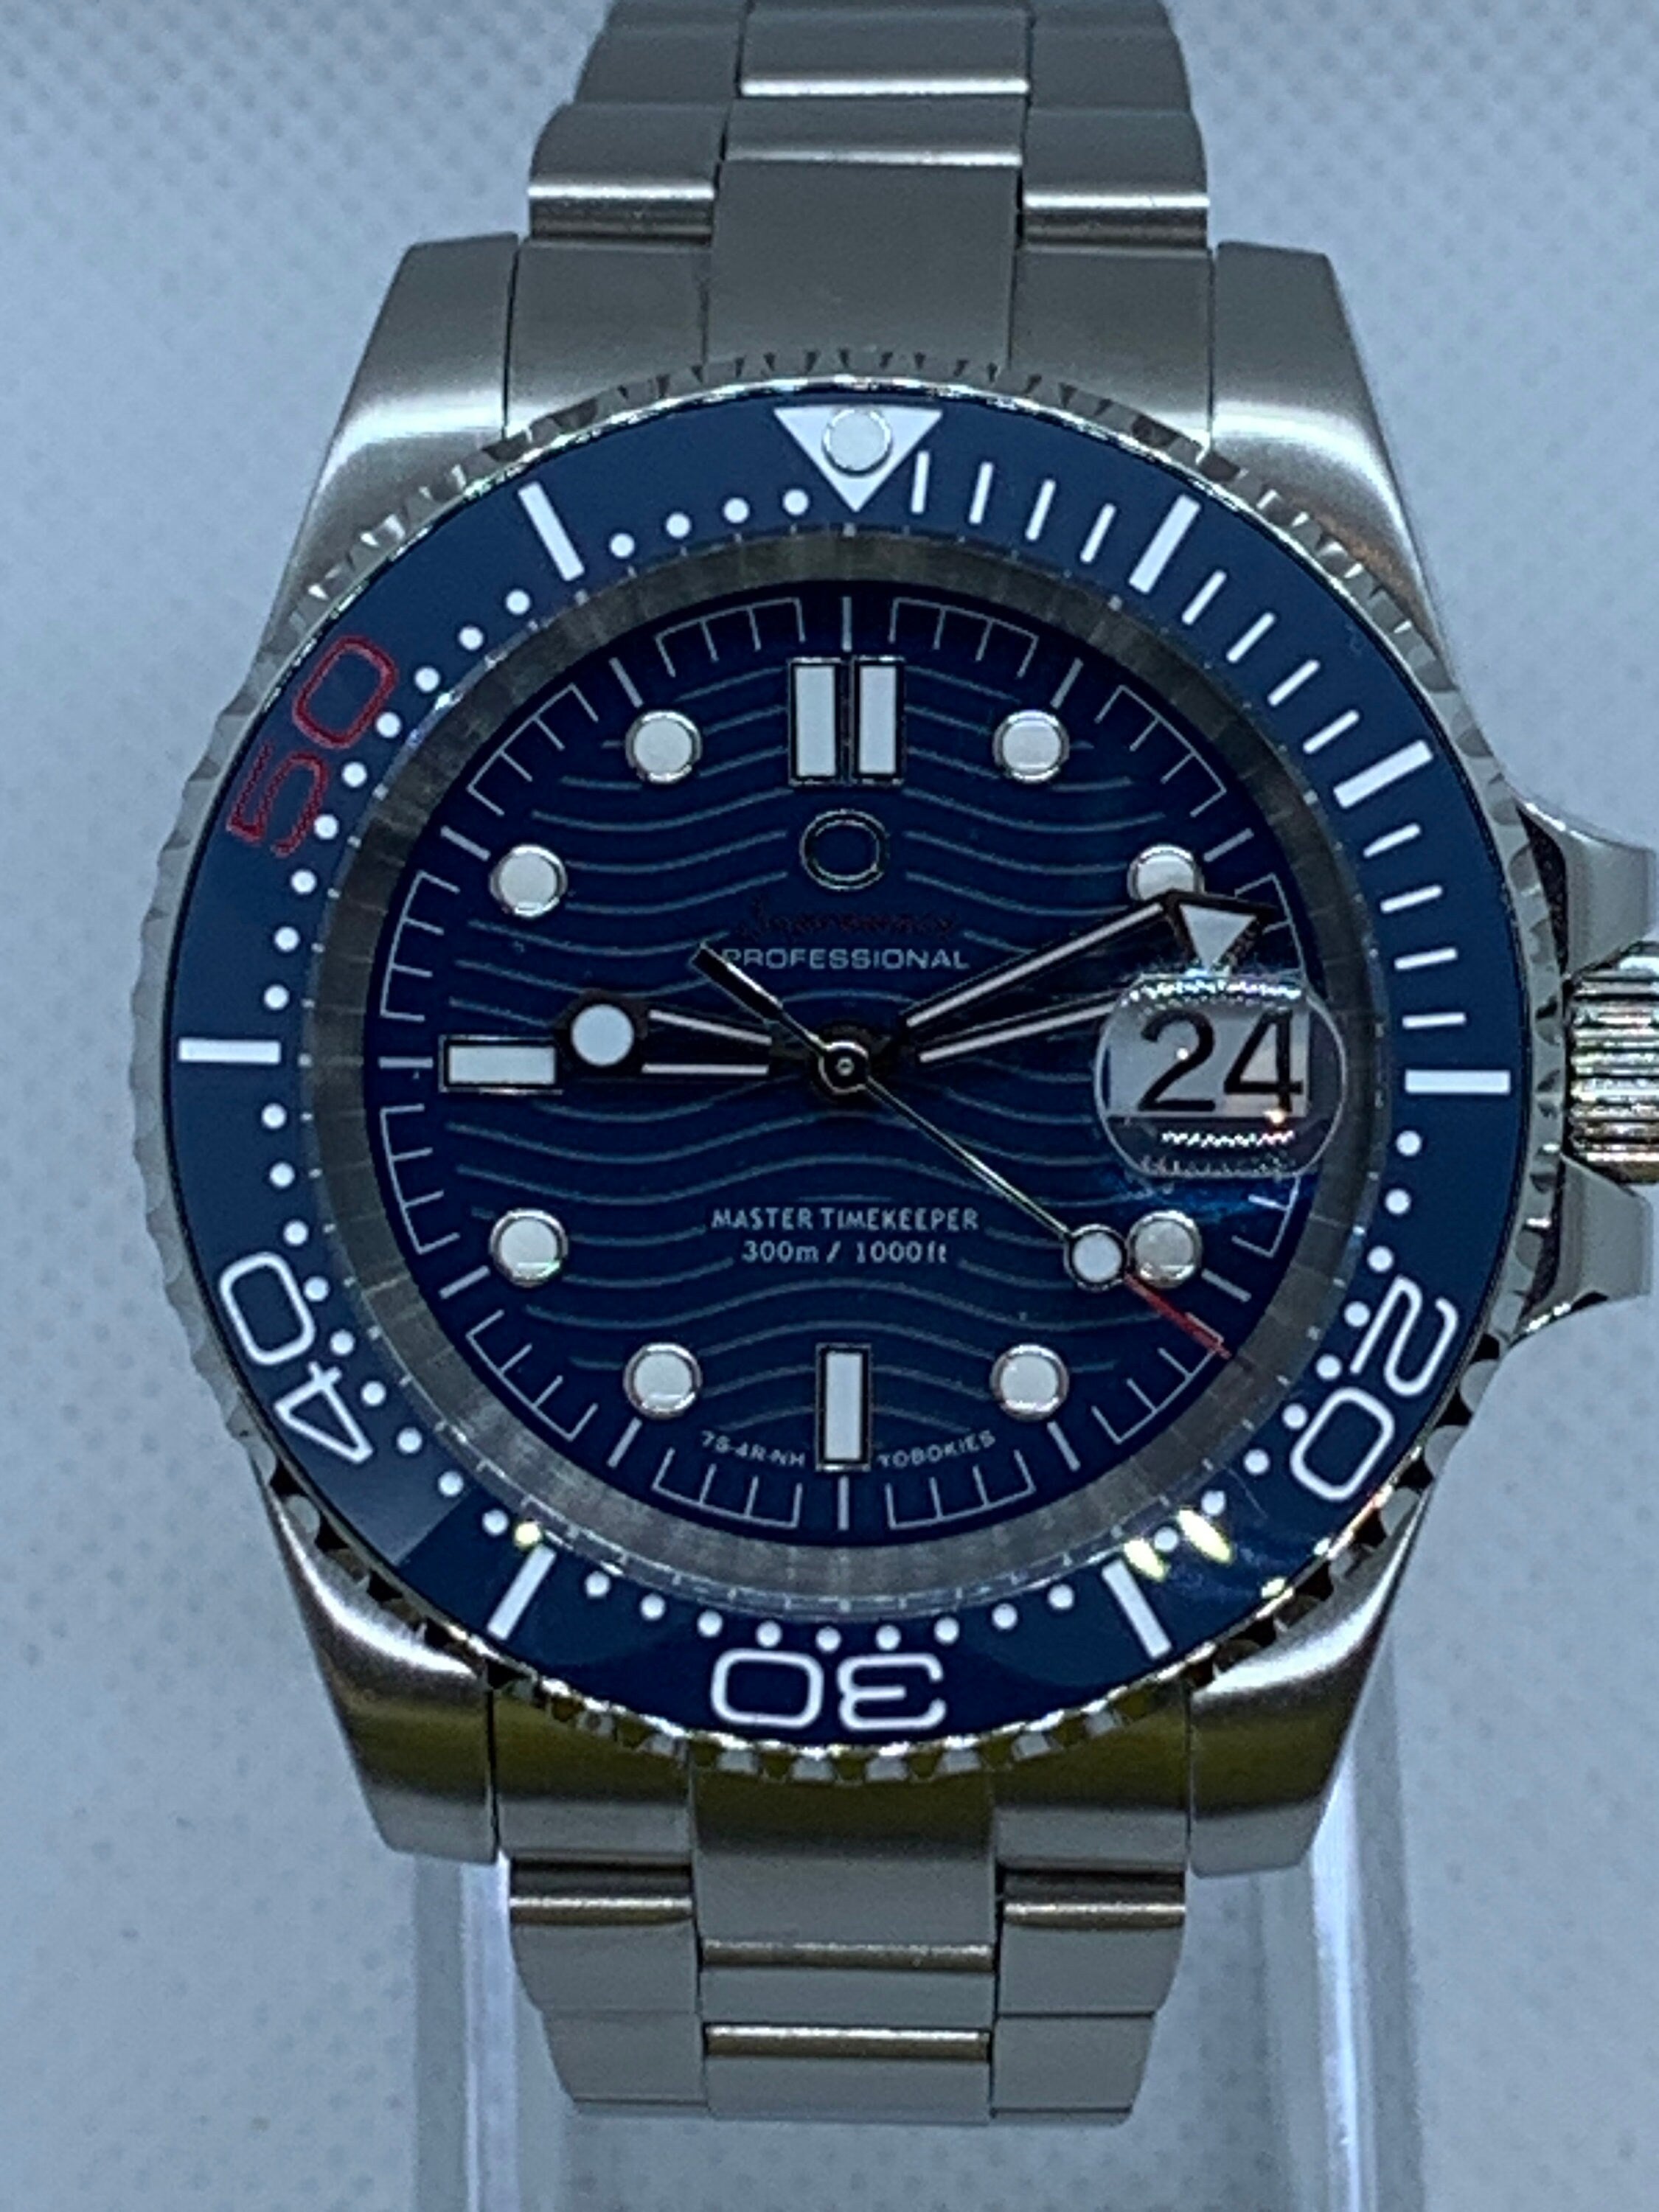 Men's 40MM Submariner Style Watch with Blue Wave Dial, Seiko NH35 